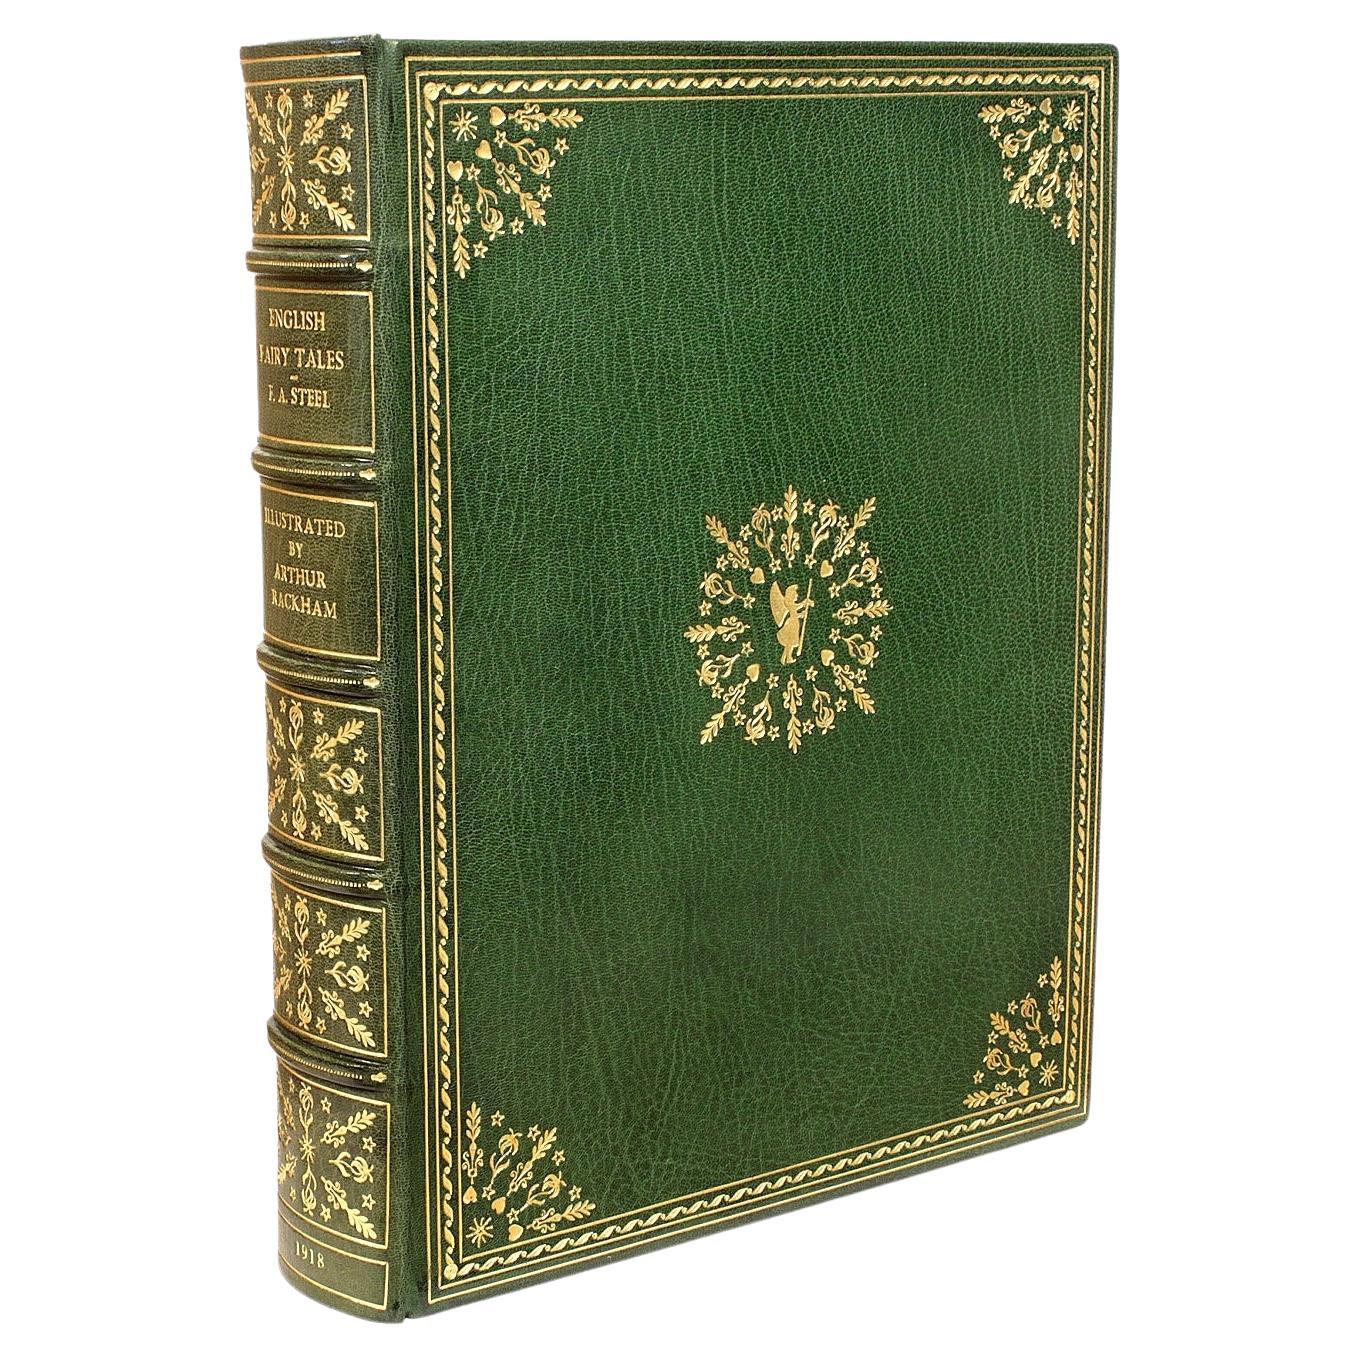 'Rackham' English Fairy Tales. Retold by Flora Annie Steel, 1918 LEATHER BOUND! For Sale